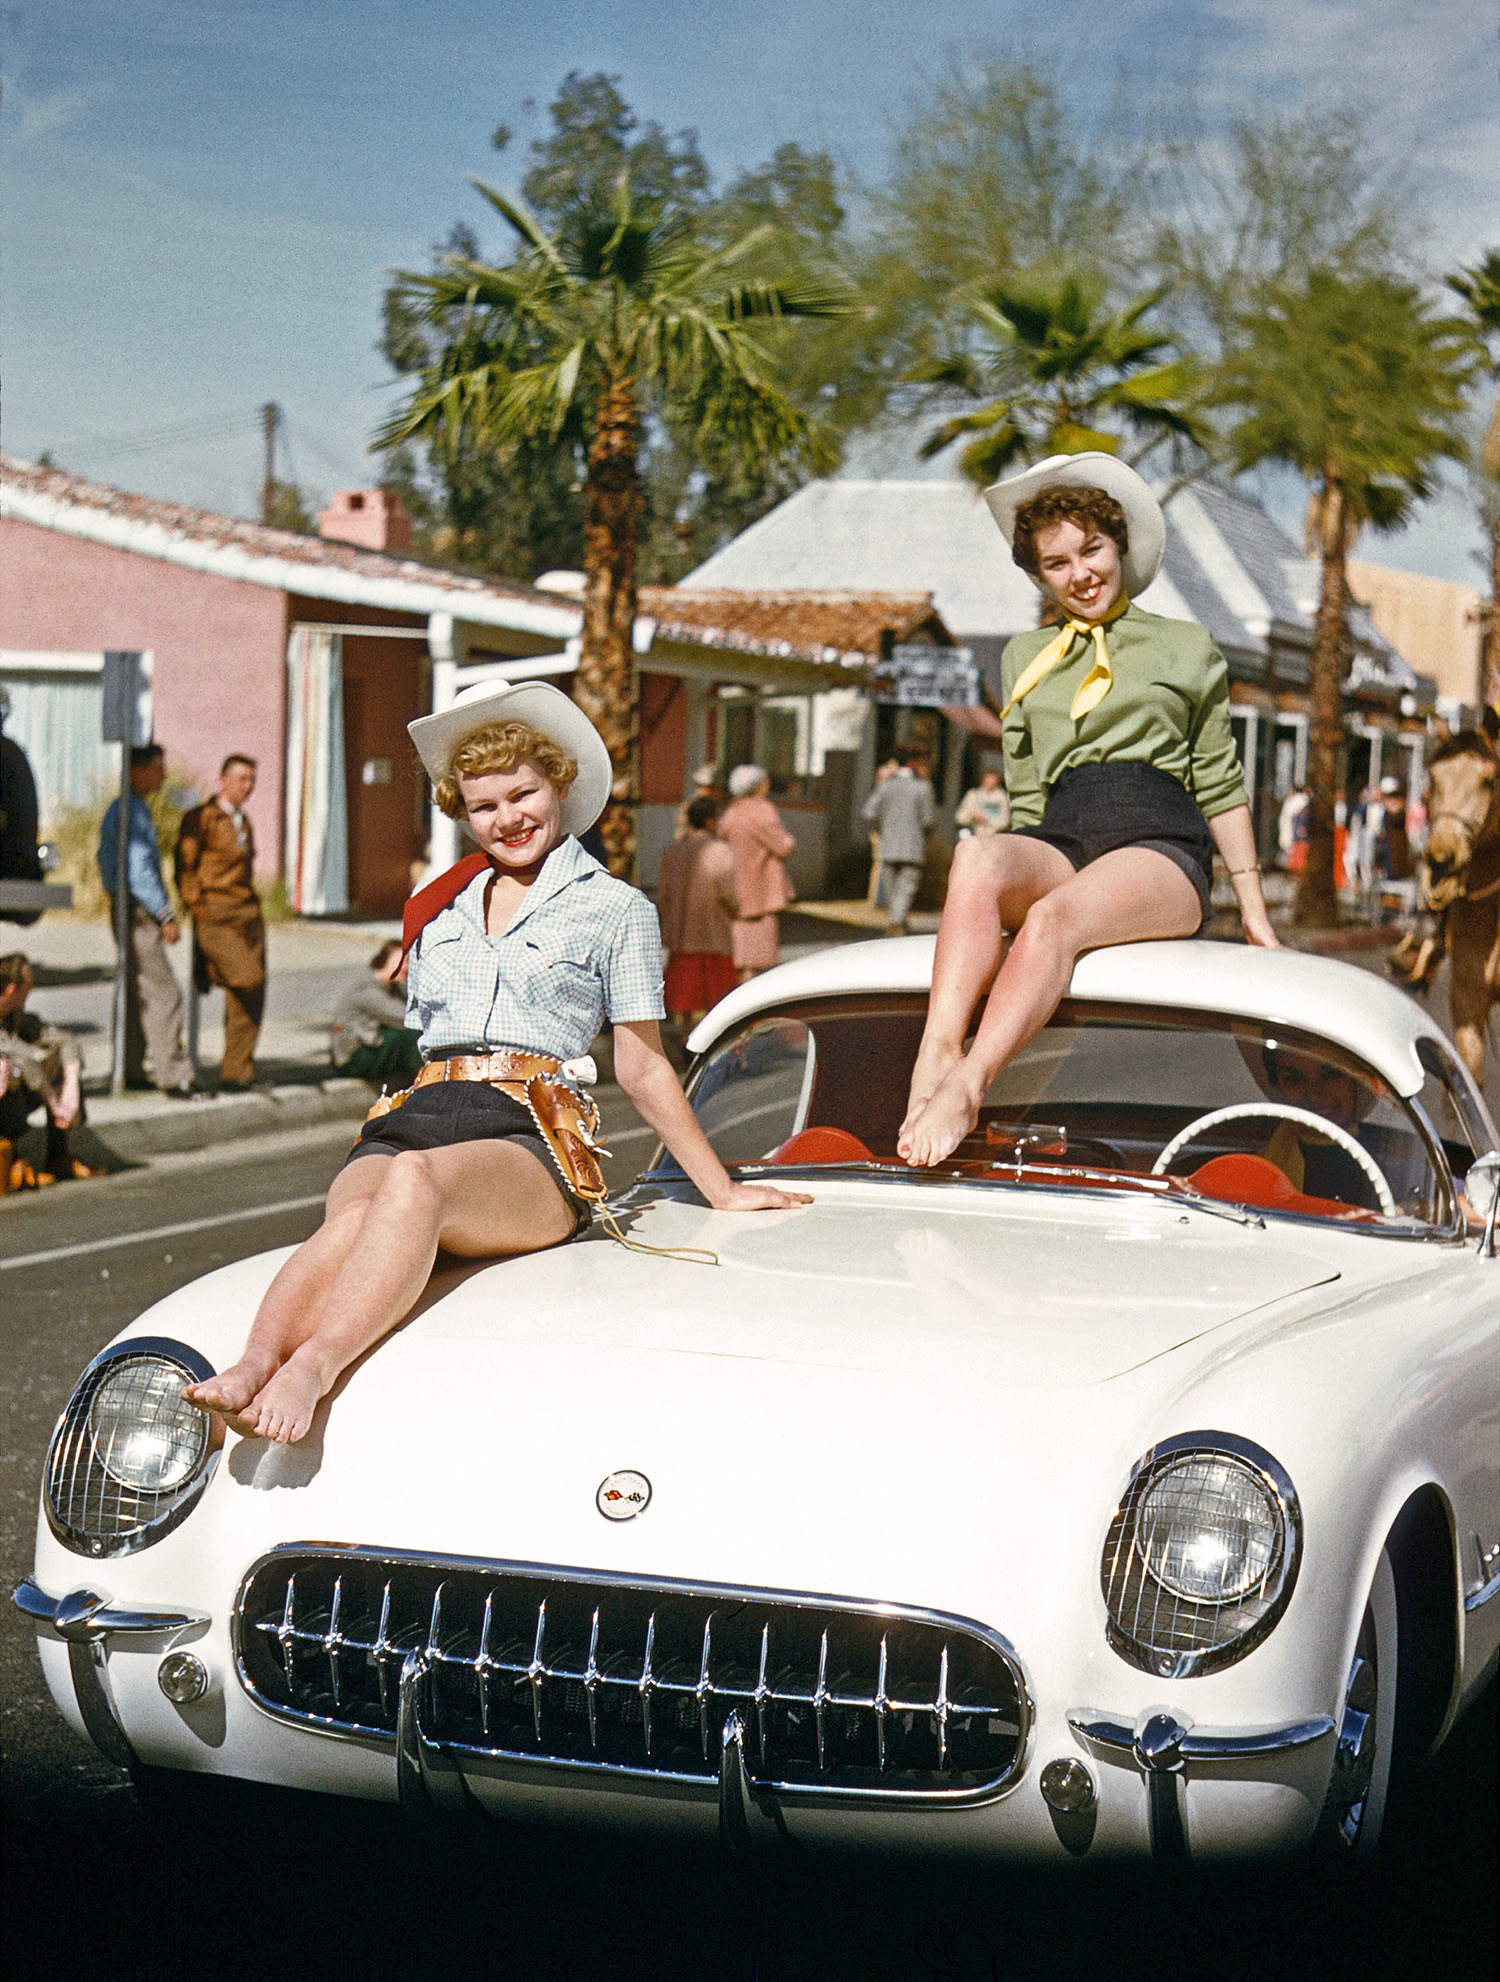 At the Palm Springs parade in February 1955. I found this 35mm Kodachrome slide in a collection at a swap meet. View full size.